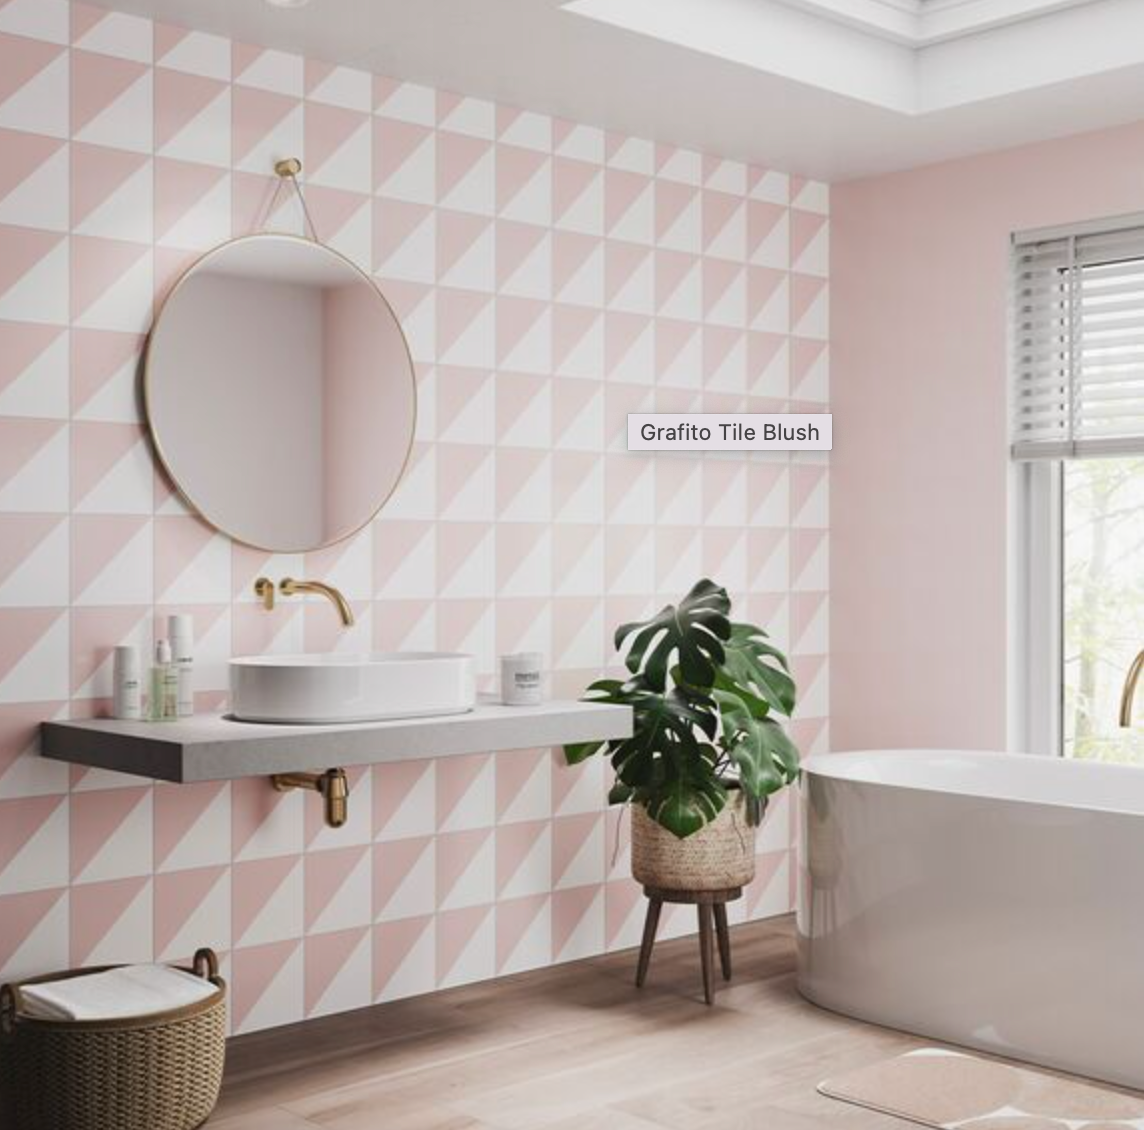 Showerwall Acrylic Patterns & Tiles Collection - Grafito Tile Blush